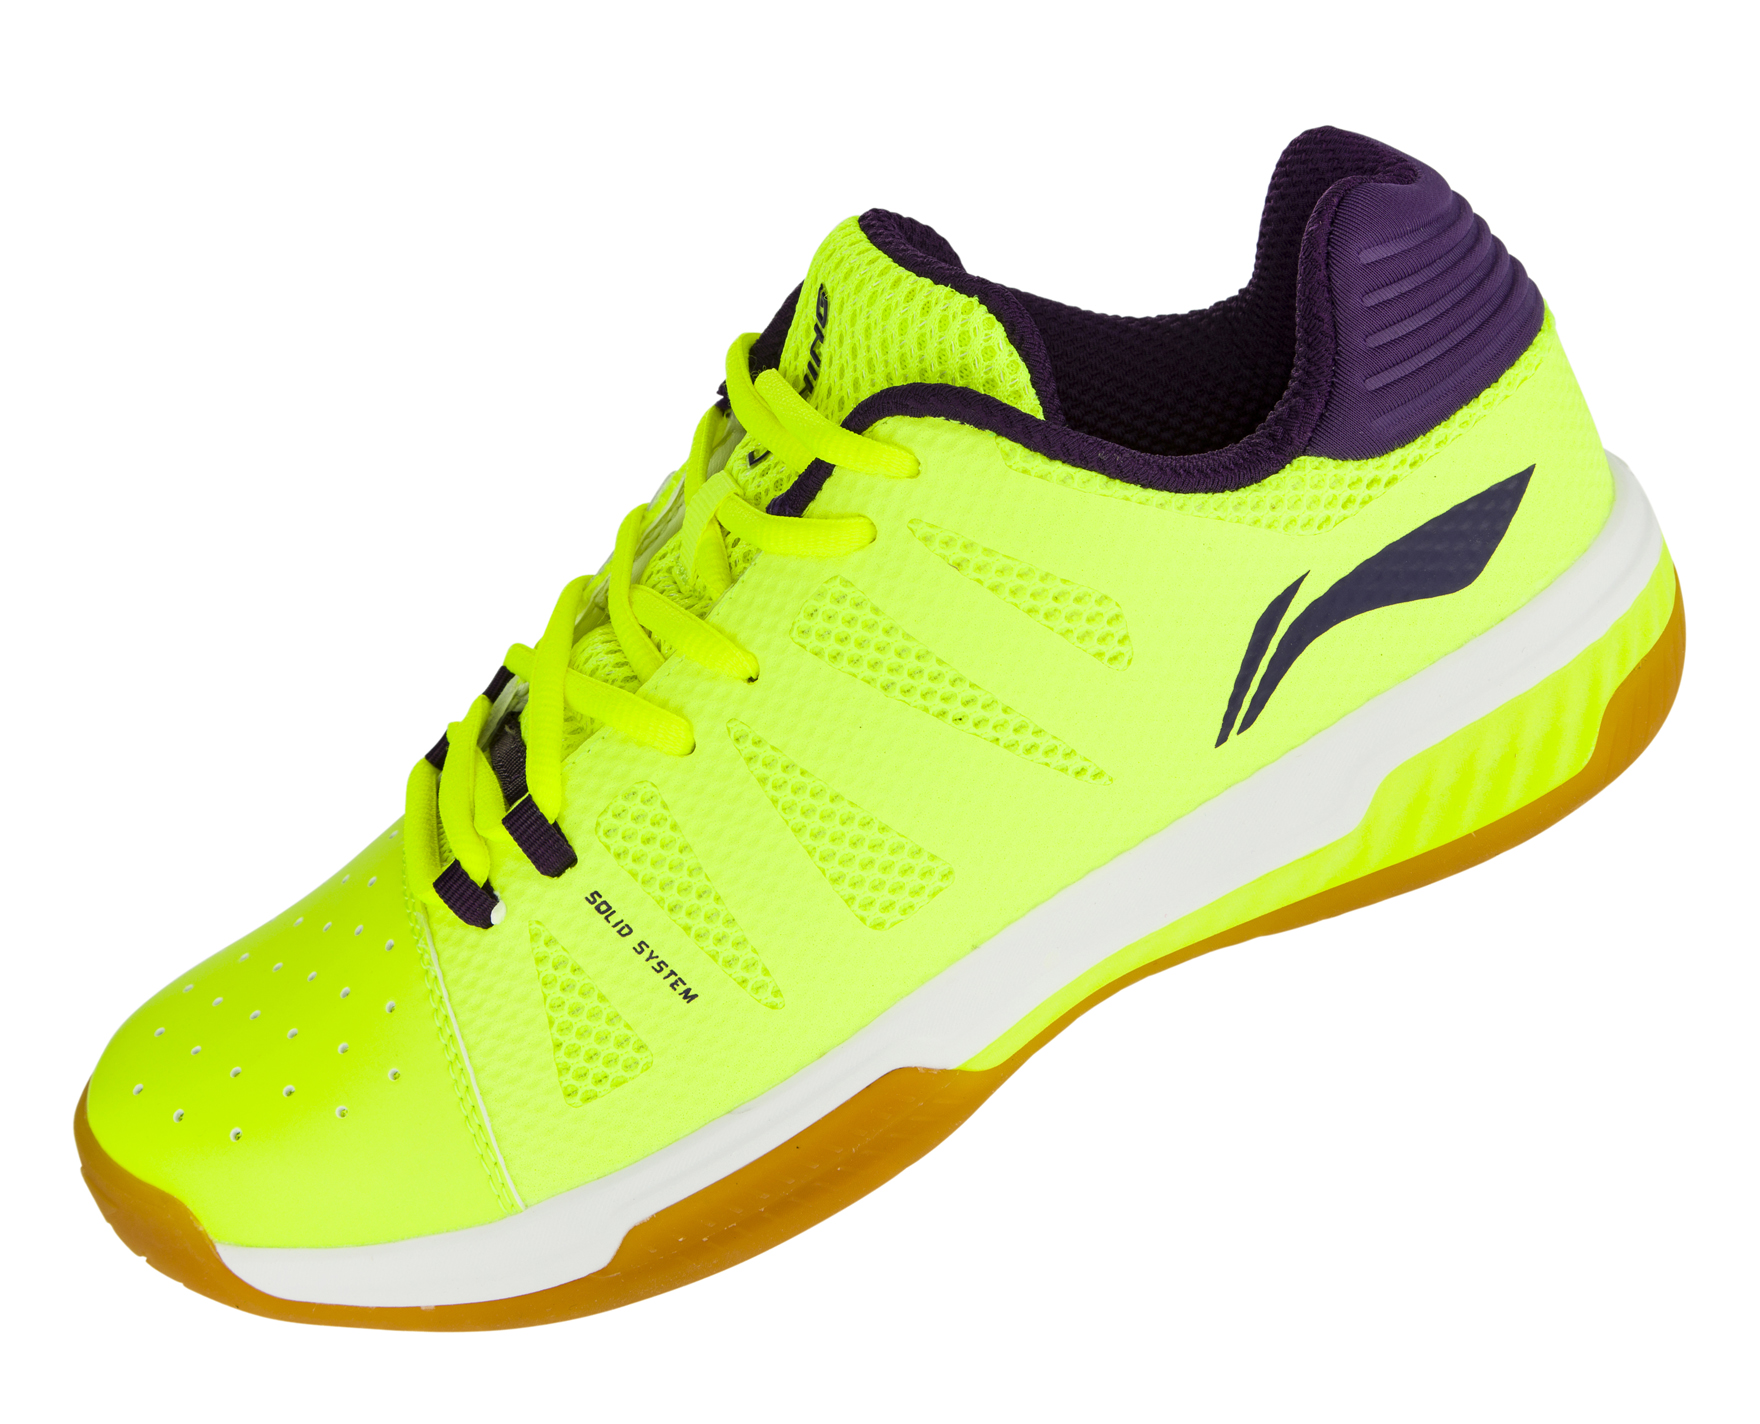 Lining badminton shoes